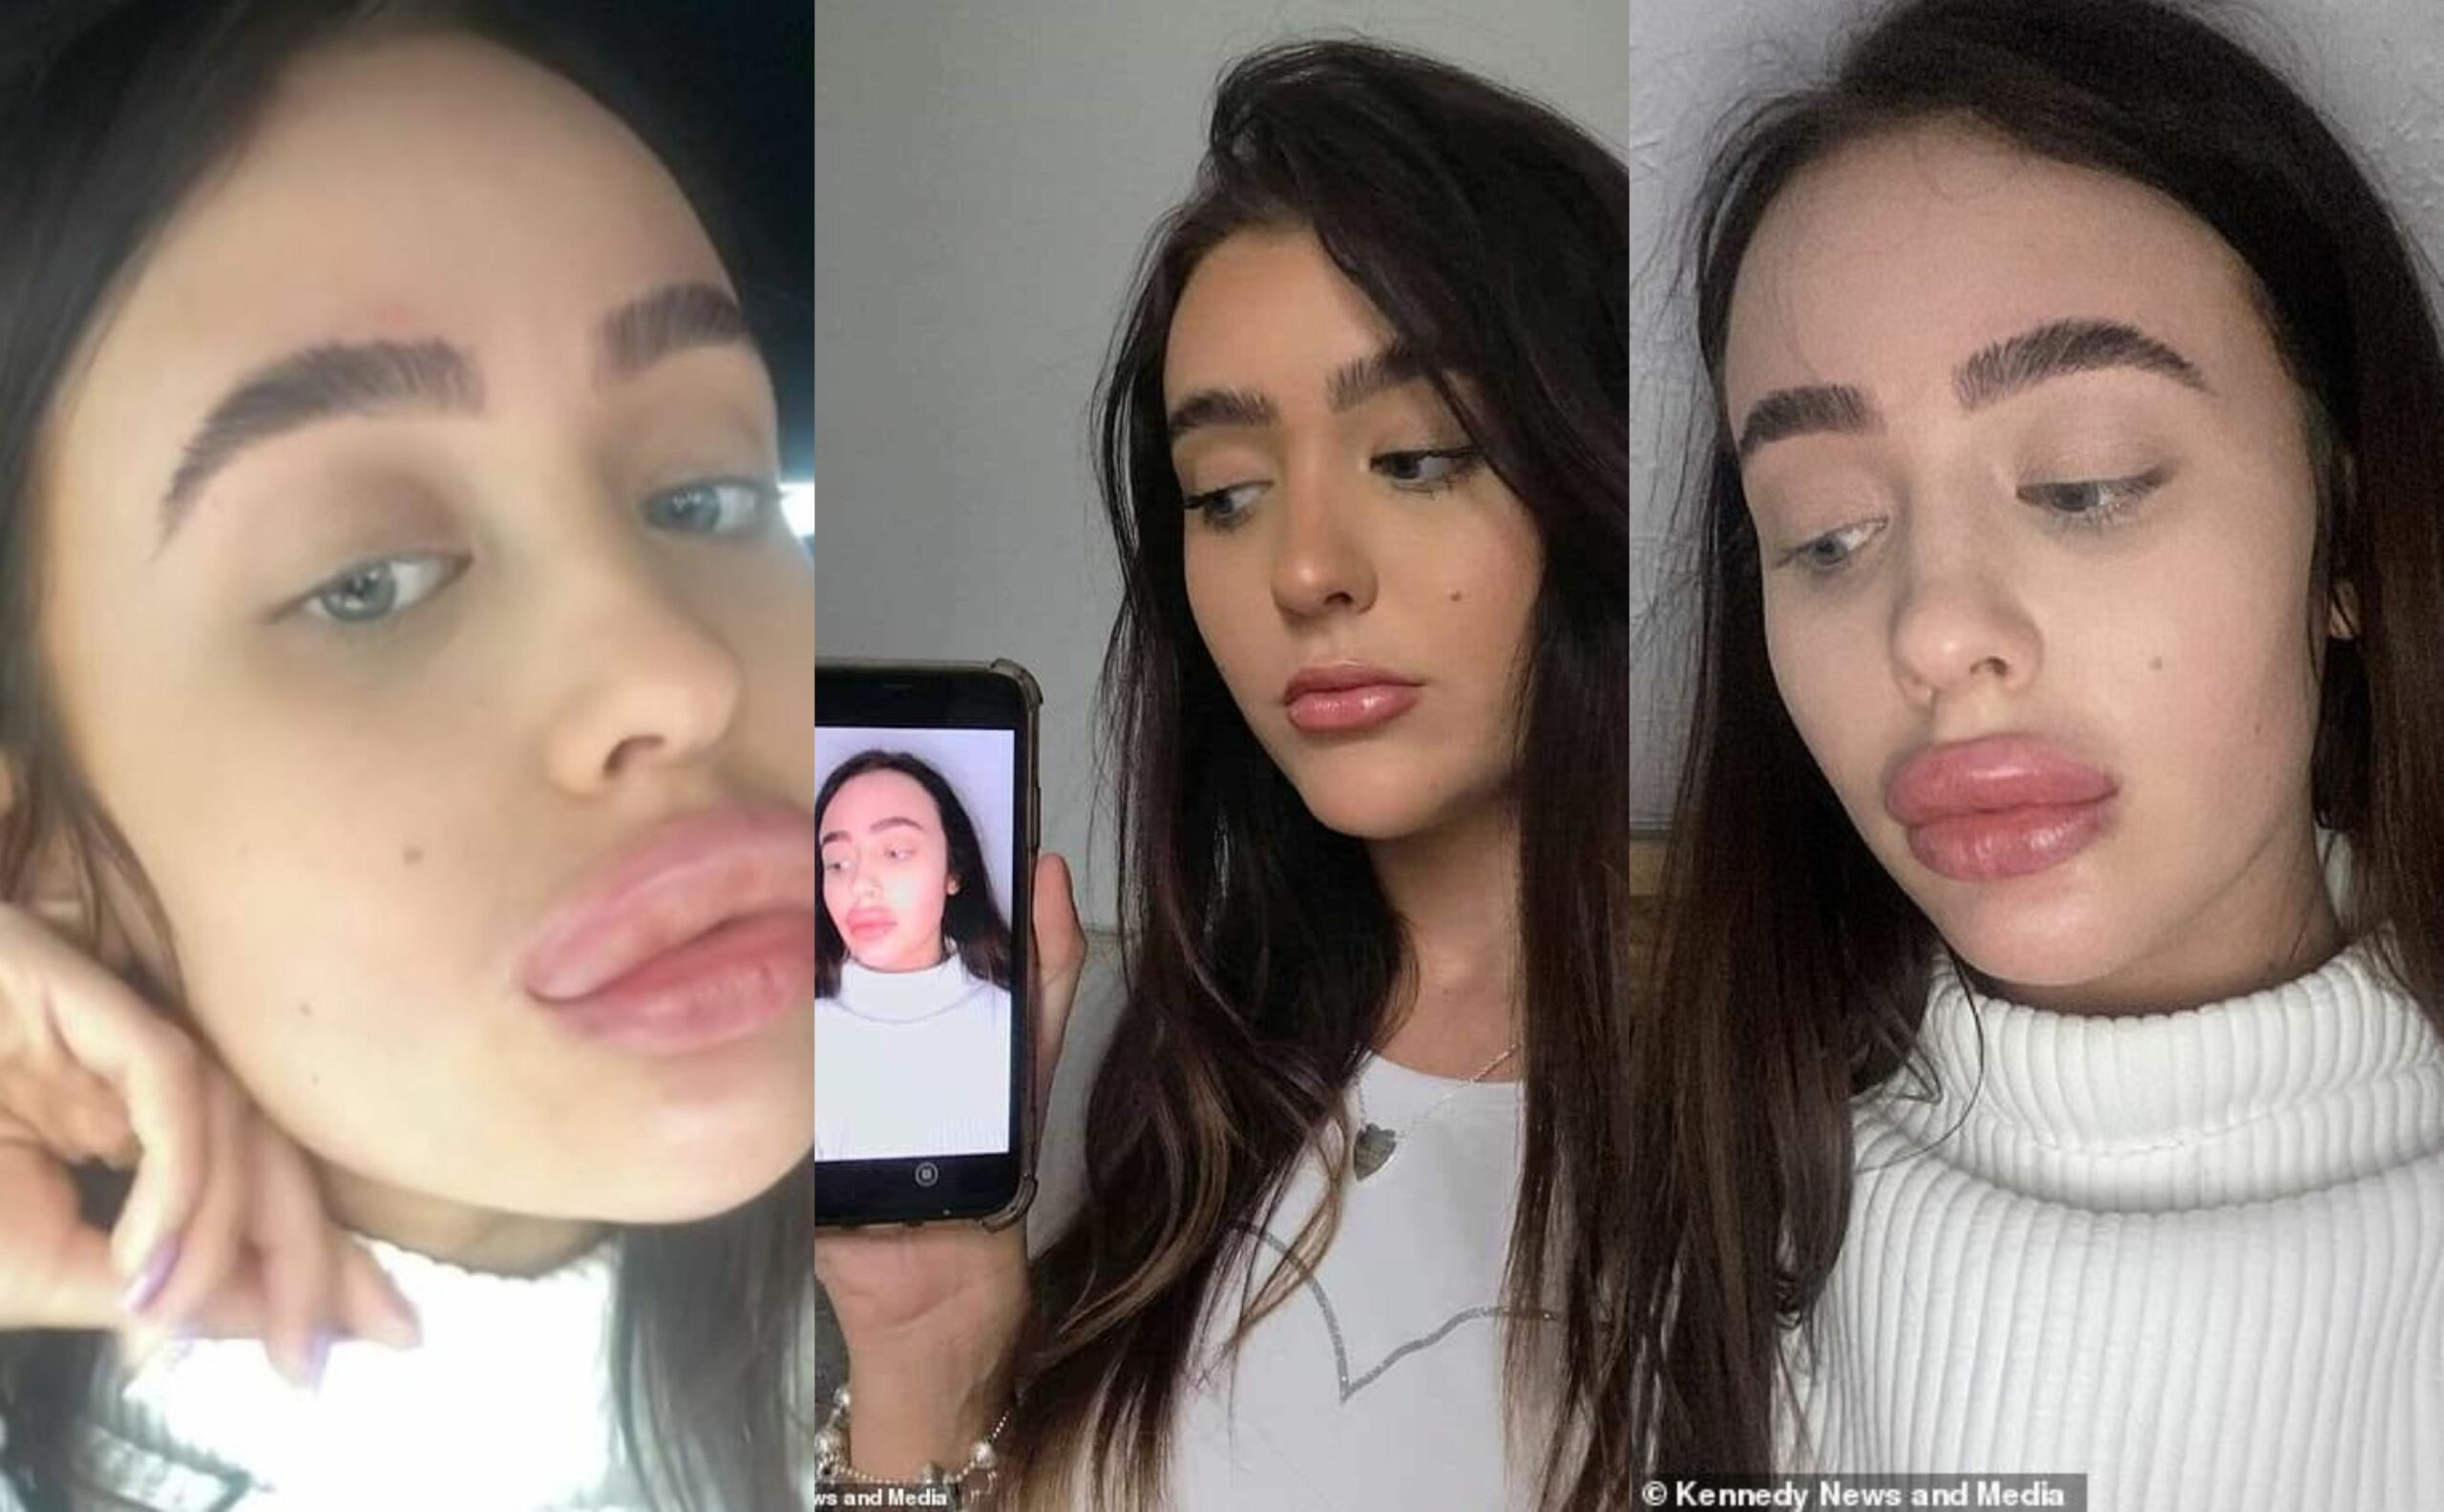 Lady's lips triple in size after botched lip filler treatment (photos)